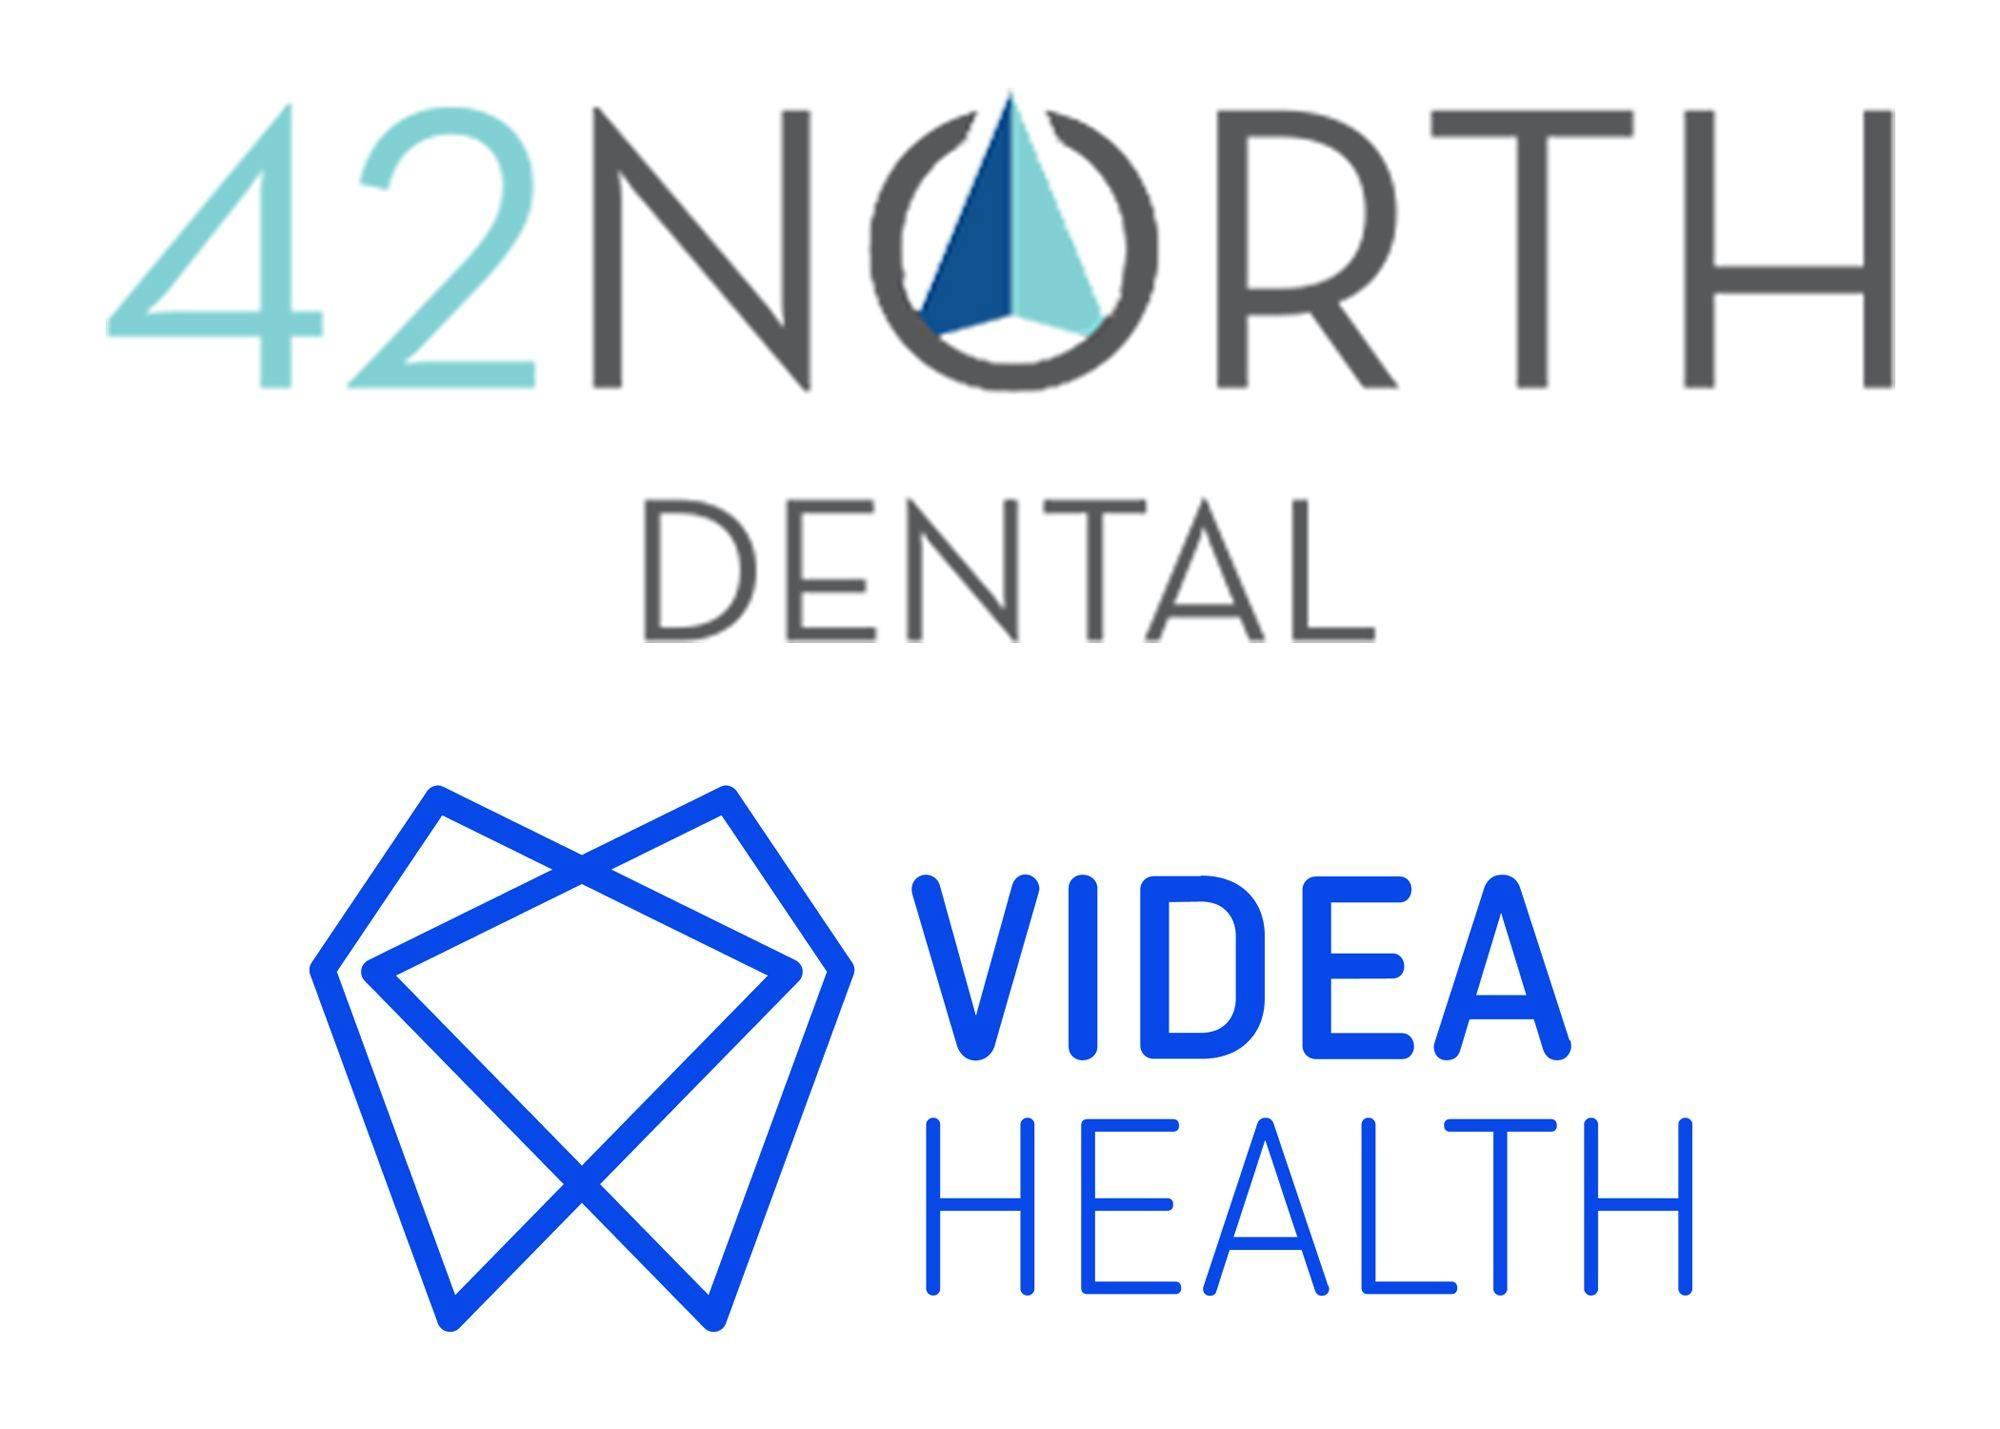 VideaHealth and 42 North Dental Partner Up